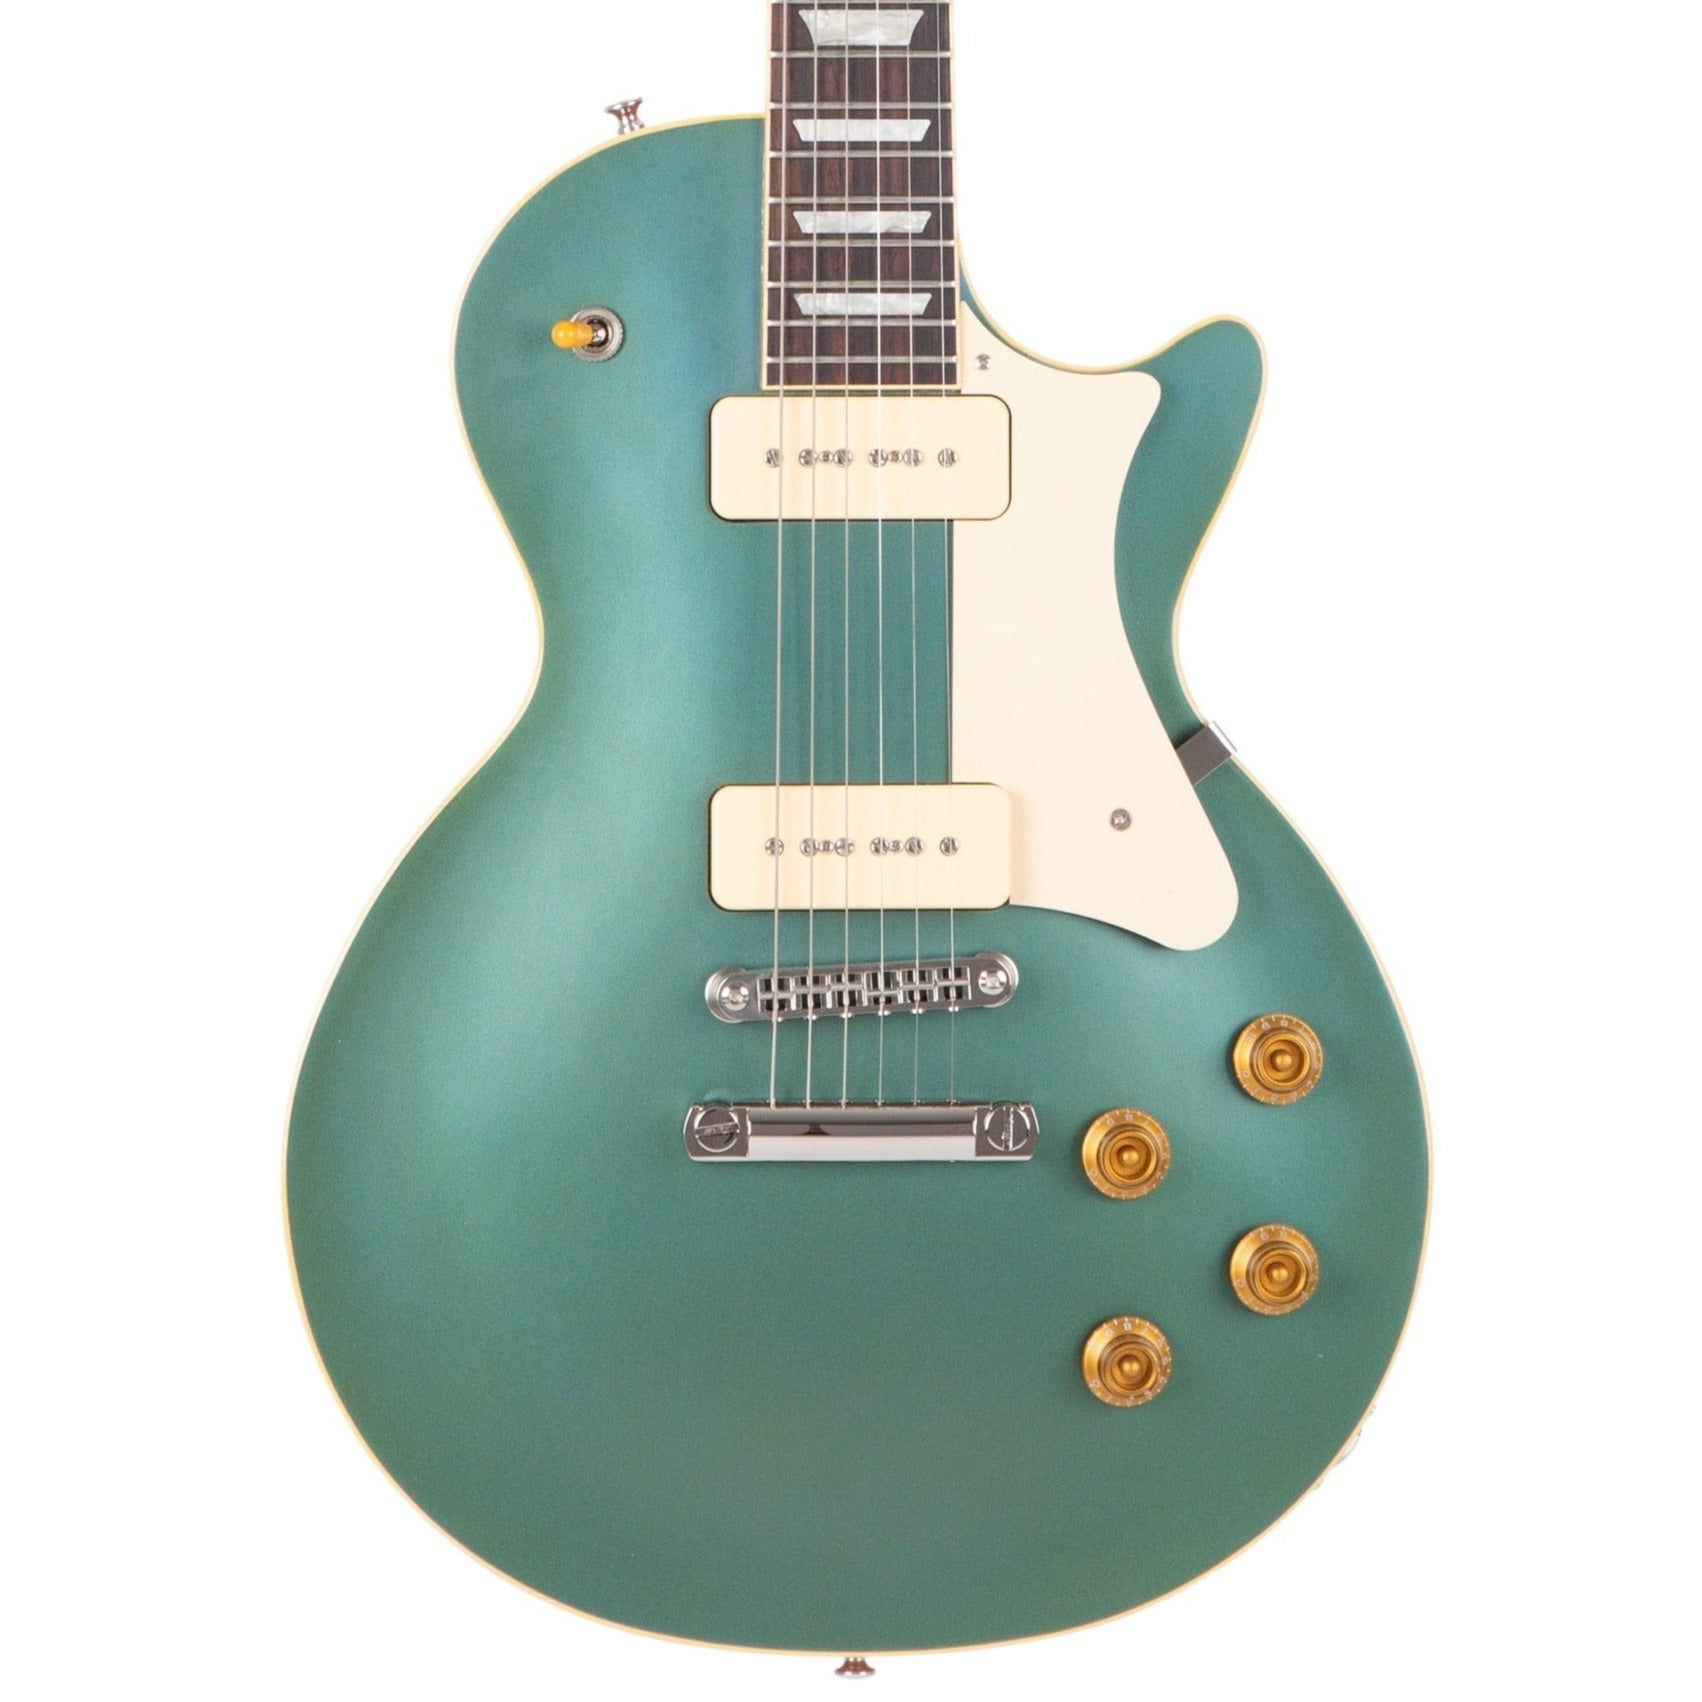 Heritage Custom Shop Core Collection H-150 P90 Electric Guitar with Case, Pelham Blue | Zoso Music Sdn Bhd